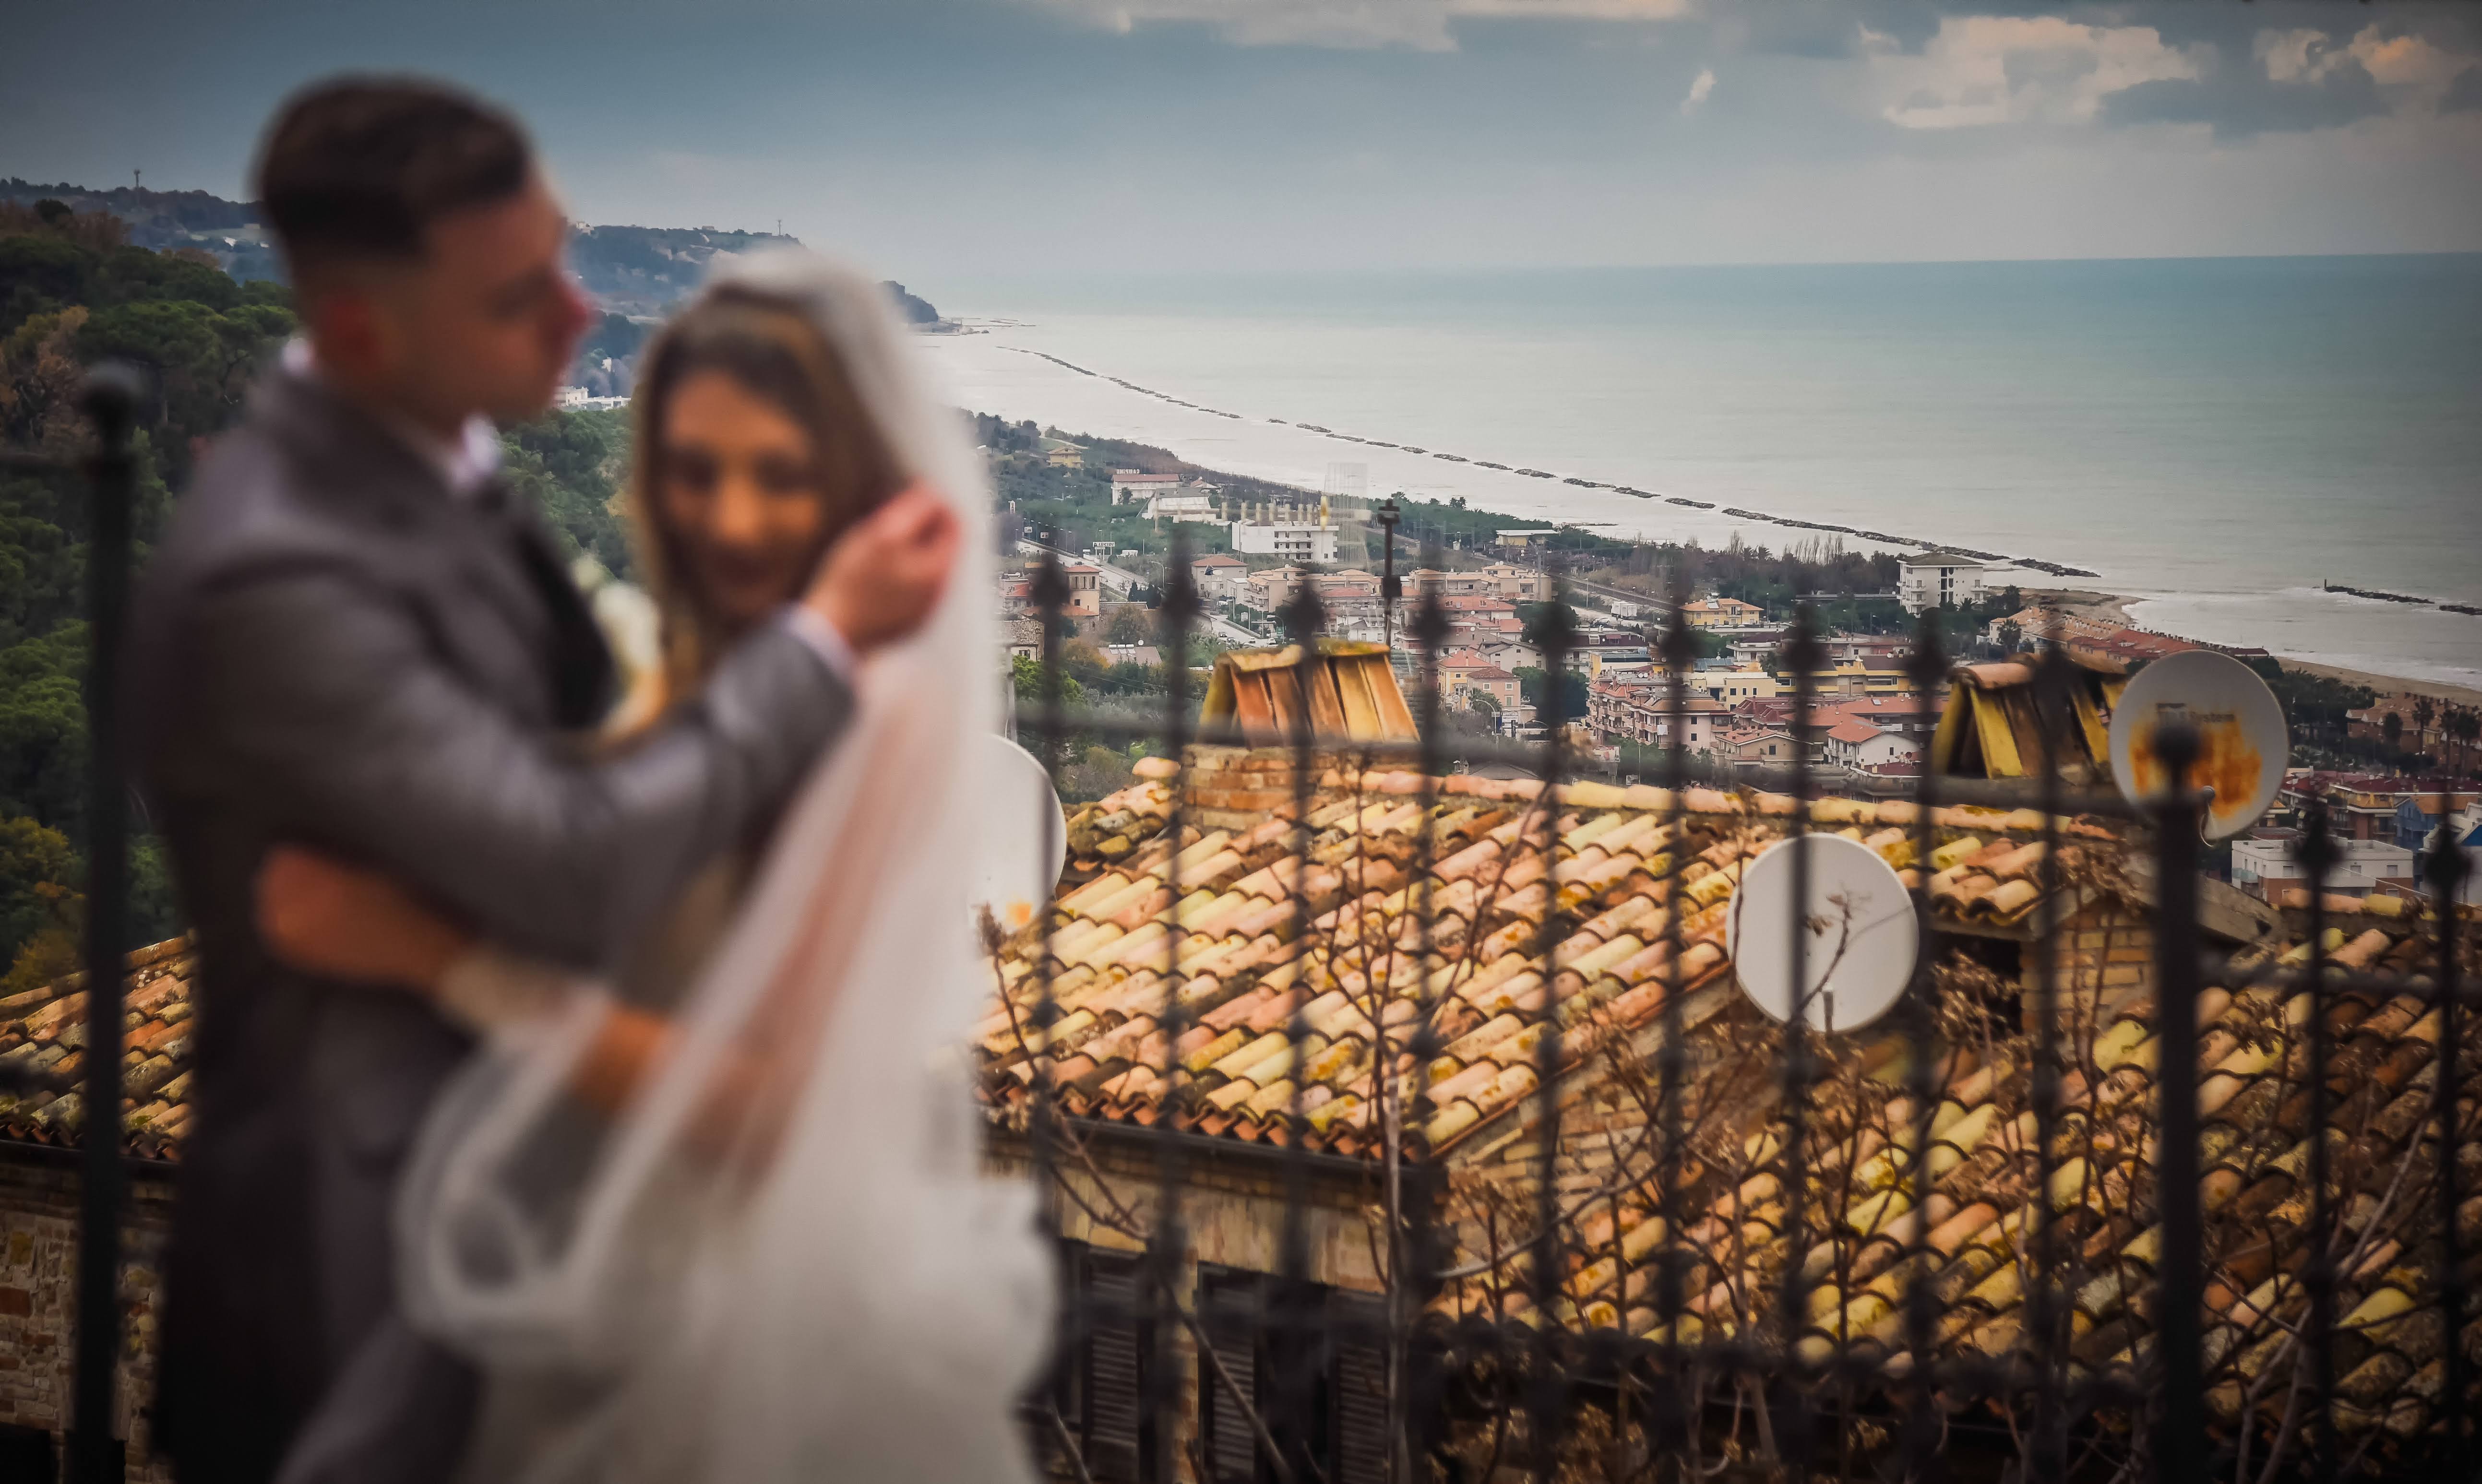 Wedding in Le Marche